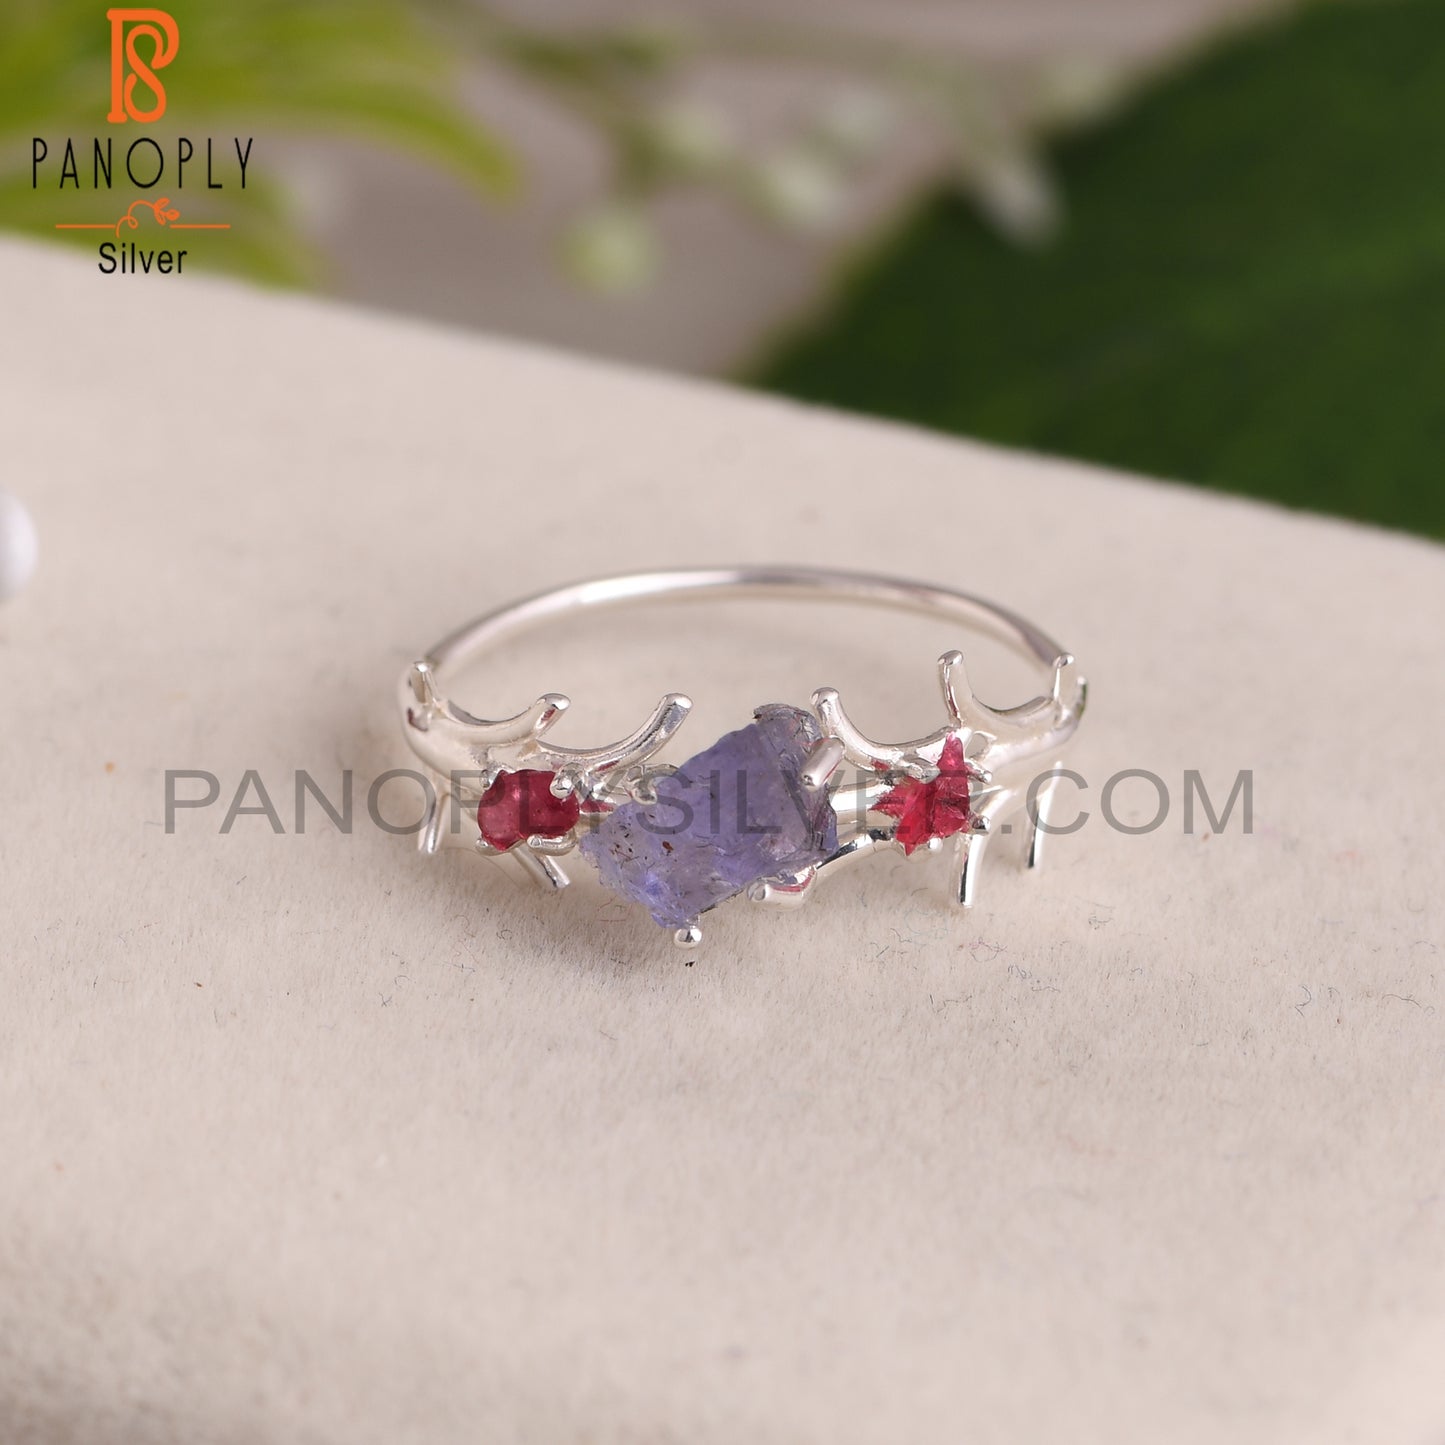 Tanzanite & Spinel Ruby Rough Sterling Silver Ring